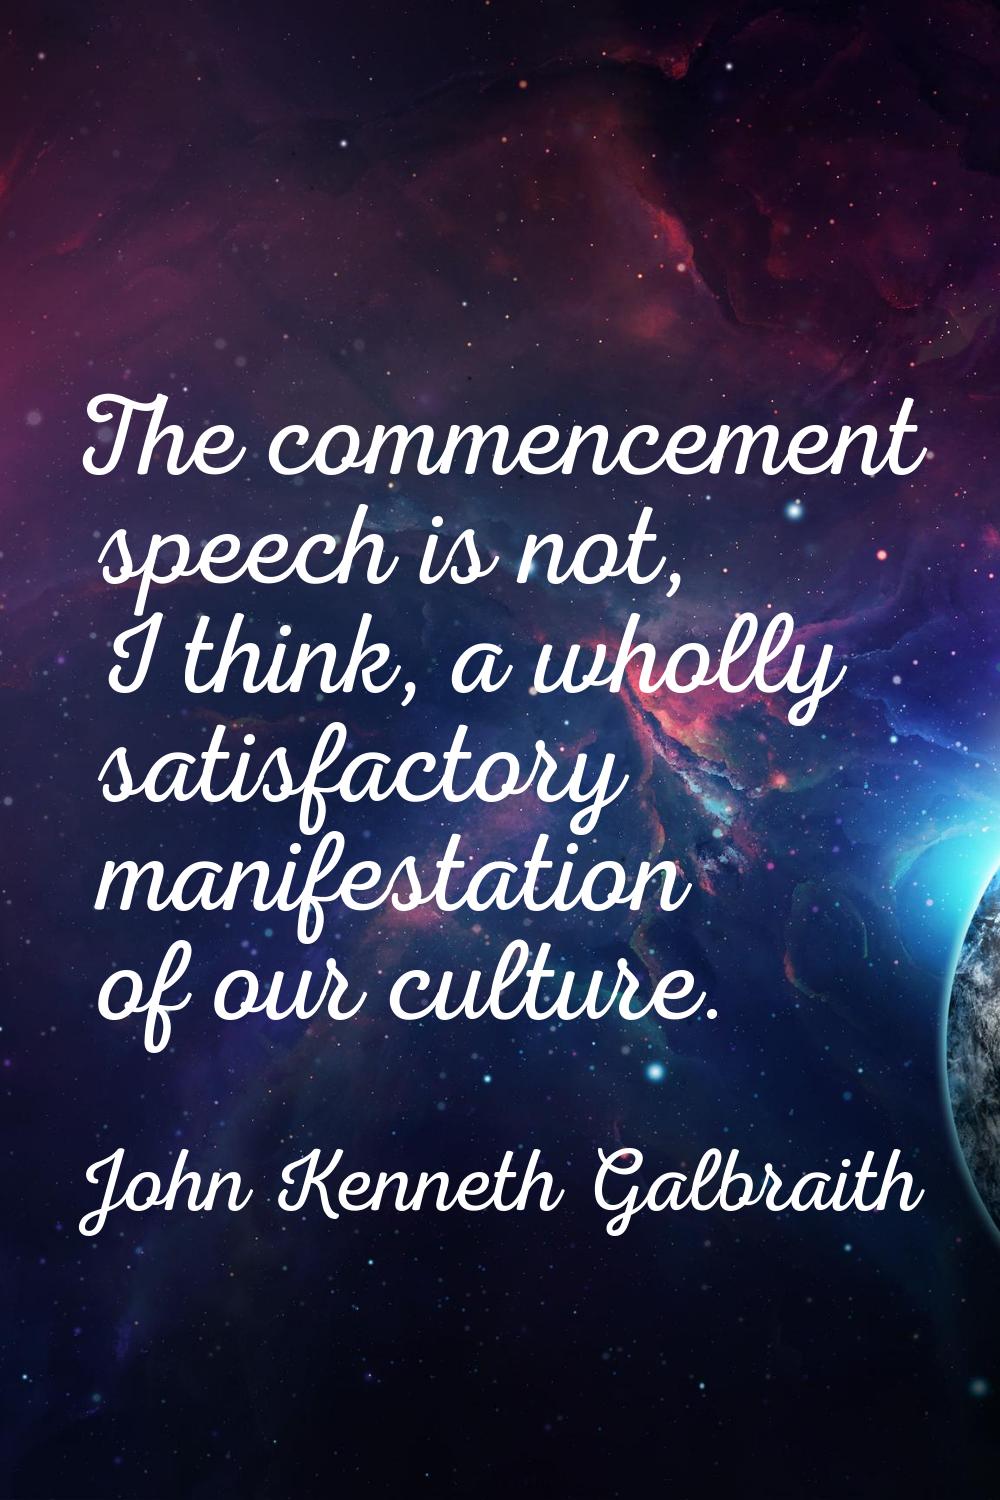 The commencement speech is not, I think, a wholly satisfactory manifestation of our culture.